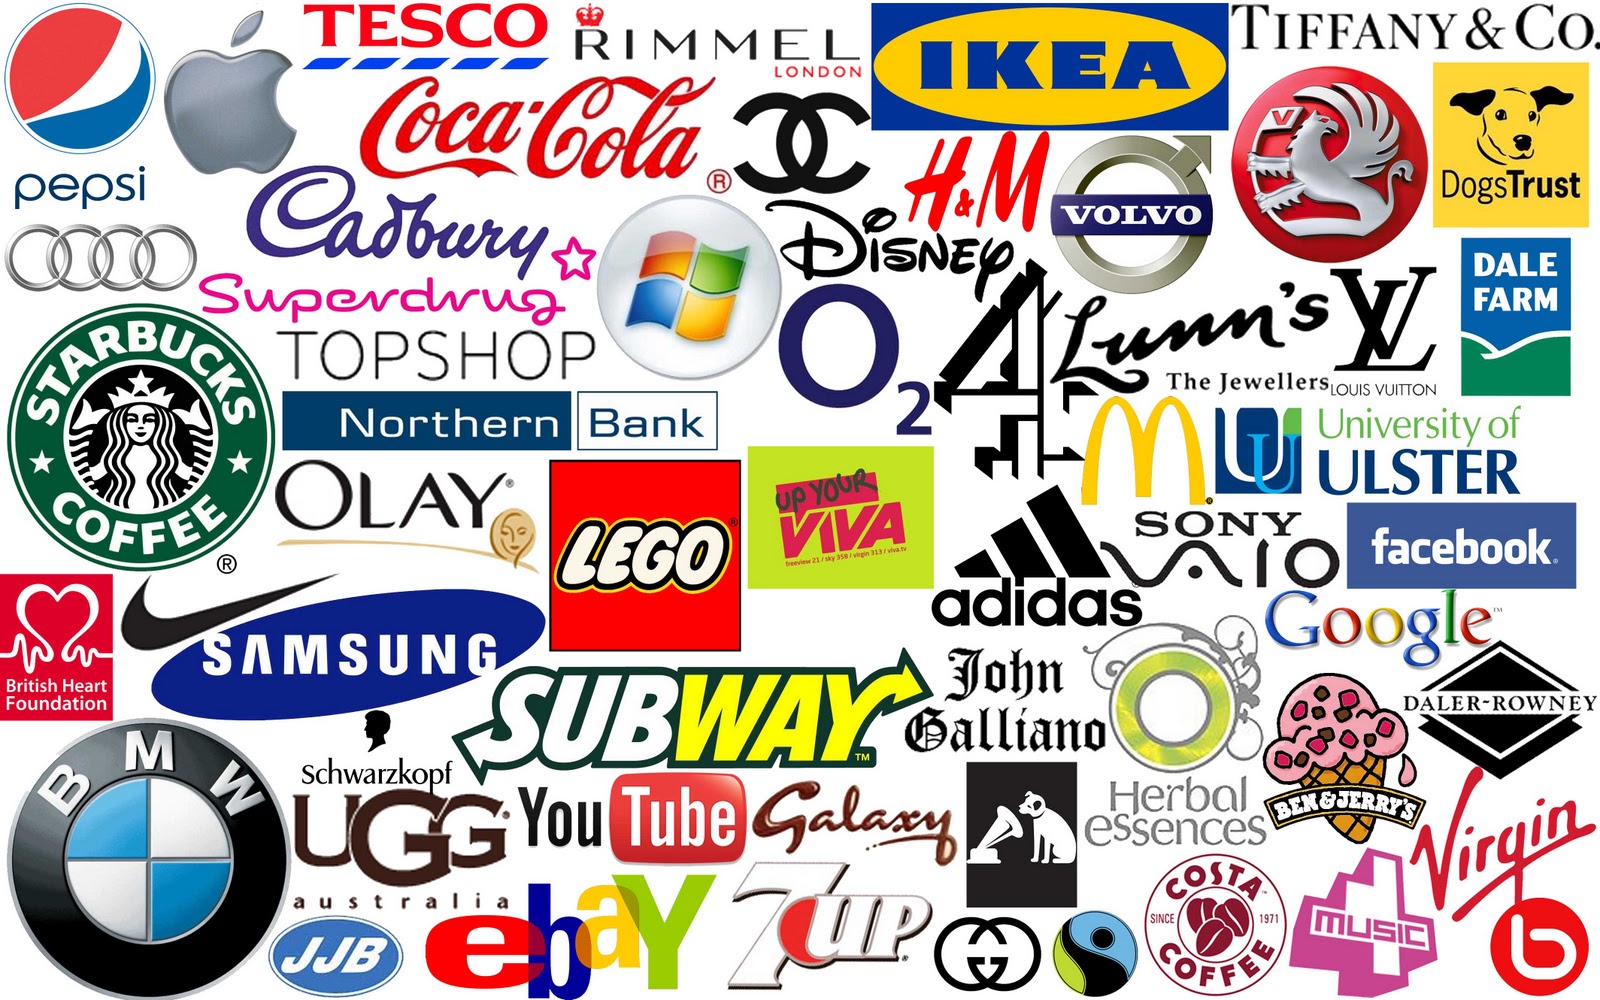 What is a Picture Really Worth? – Logos in Advertising